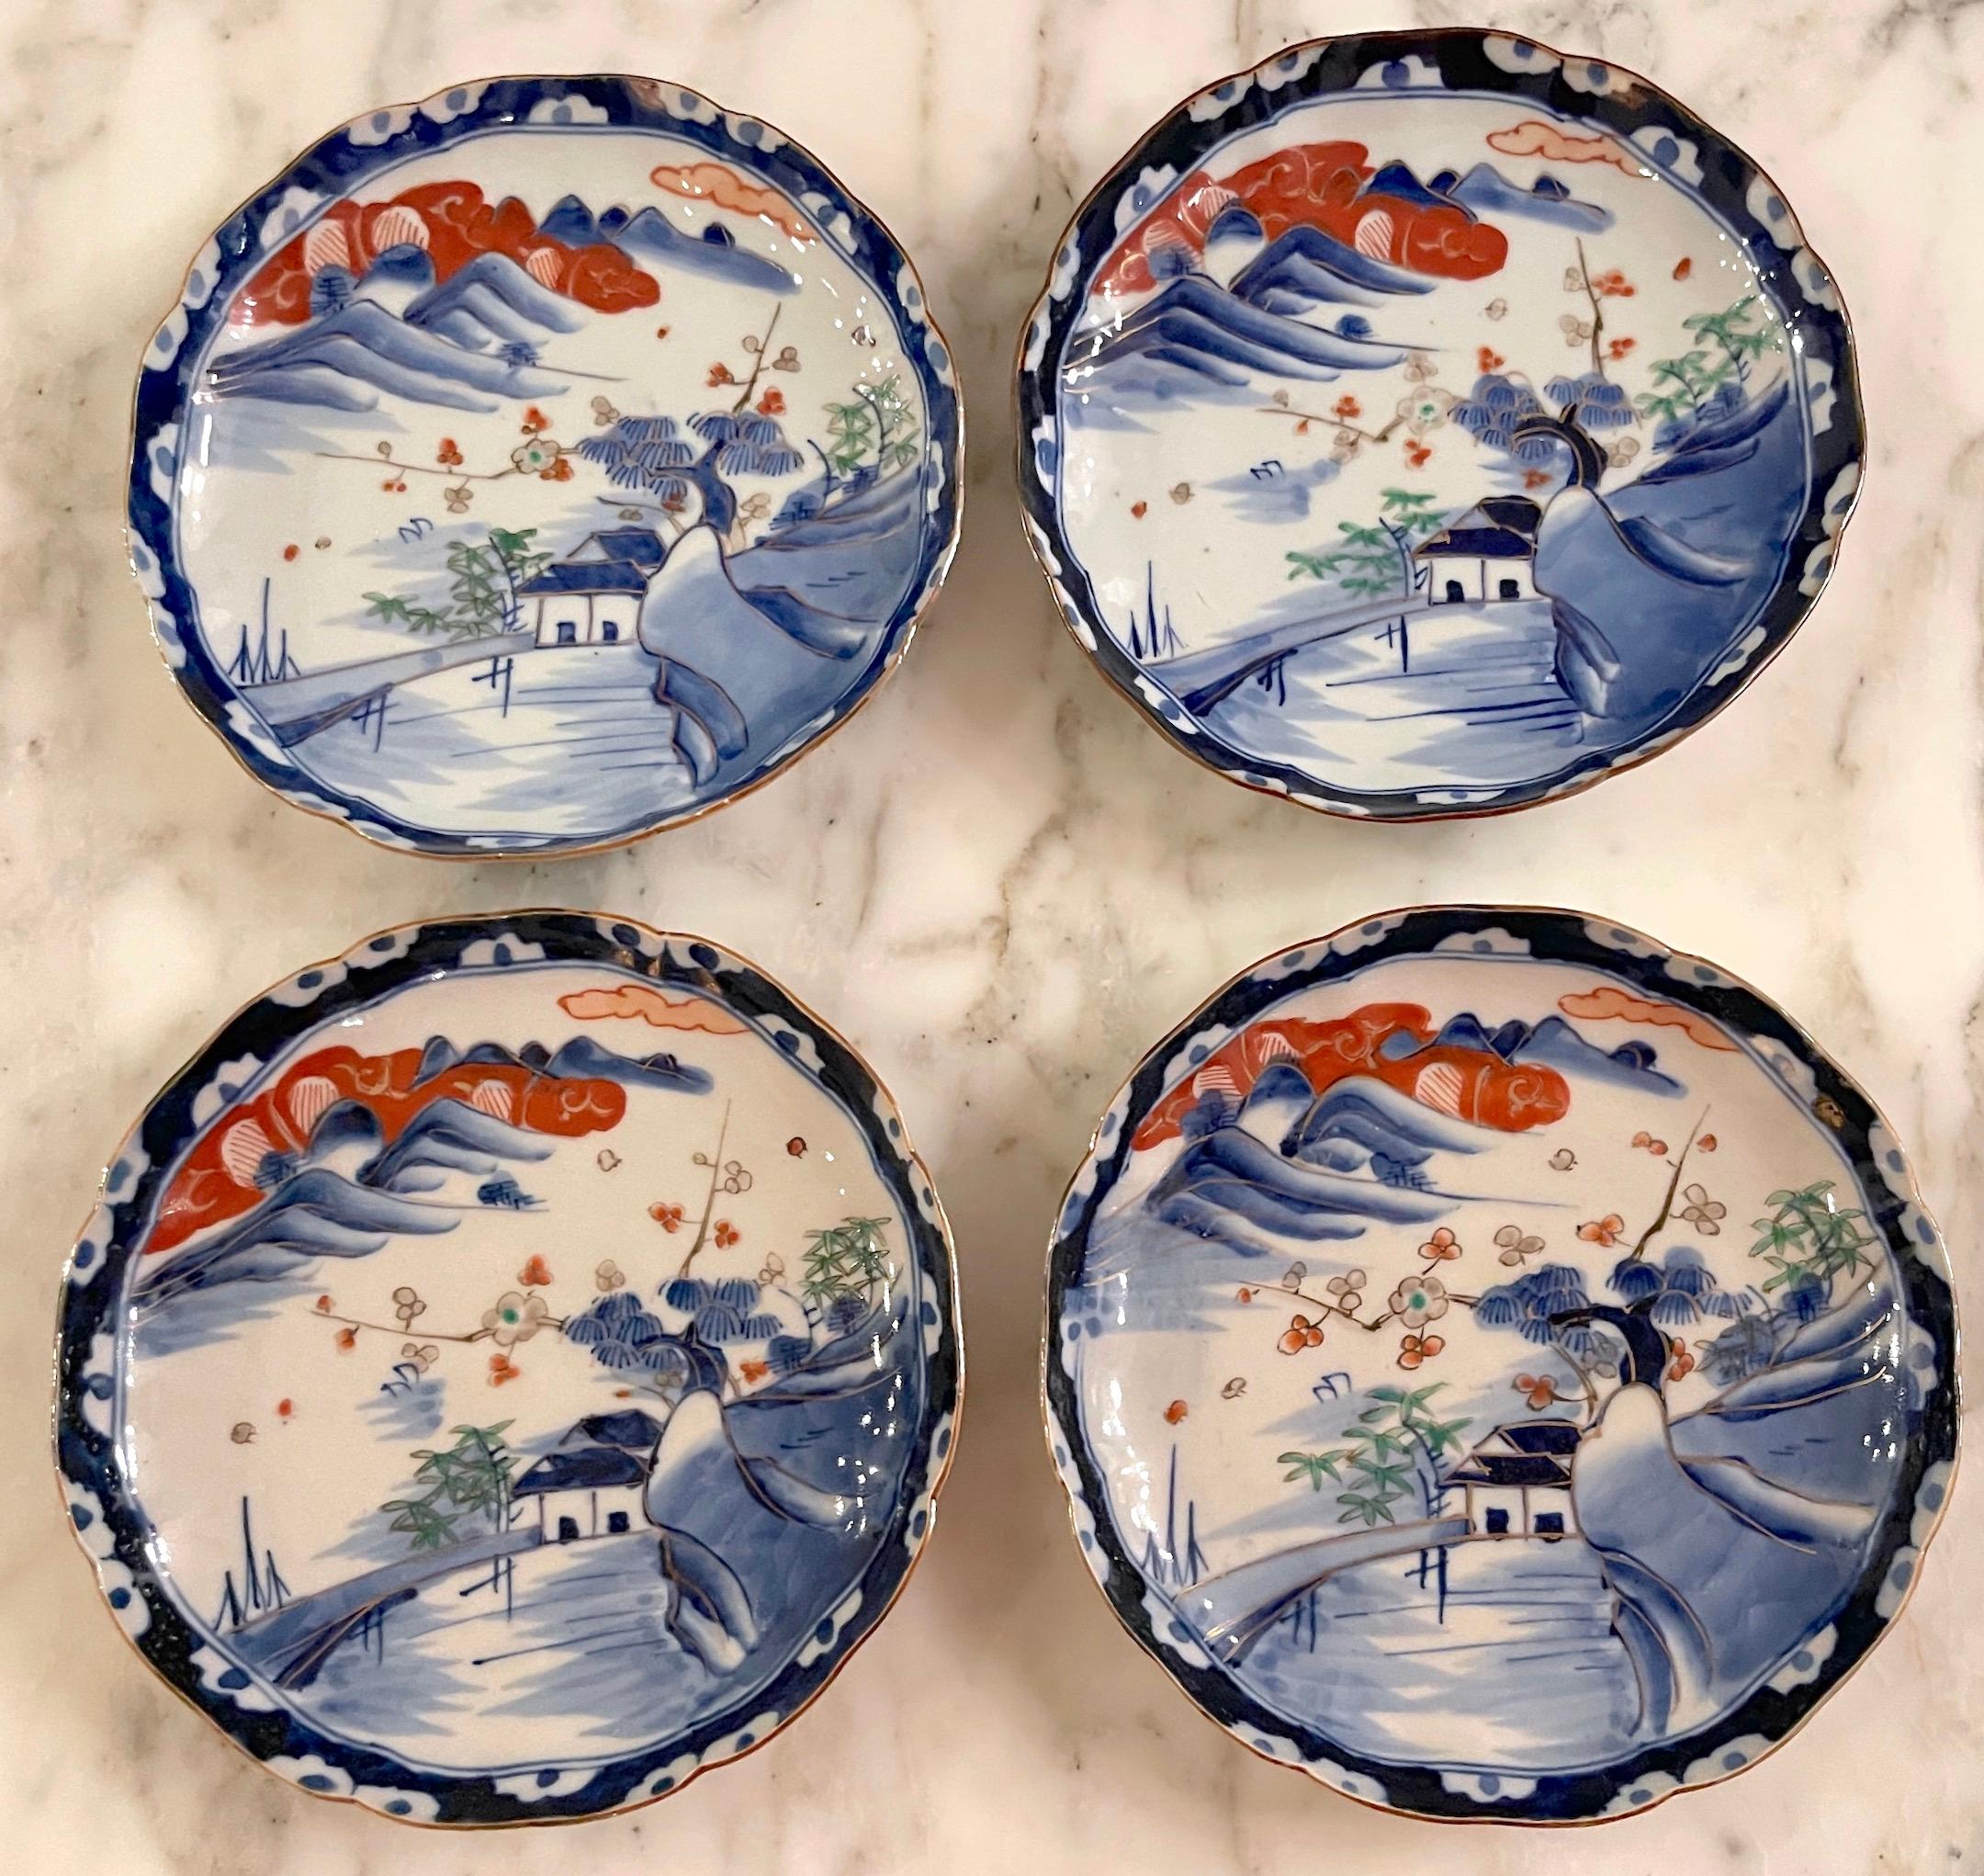 Four Meiji Period Scenic Imari Scalloped Plates, Fukagawa Attributed 
Japan, circa 1905

These four Imari scalloped plates from the Meiji Period are exquisite examples of Japanese porcelain artistry. The plates are attributed to the Fukagawa kiln,